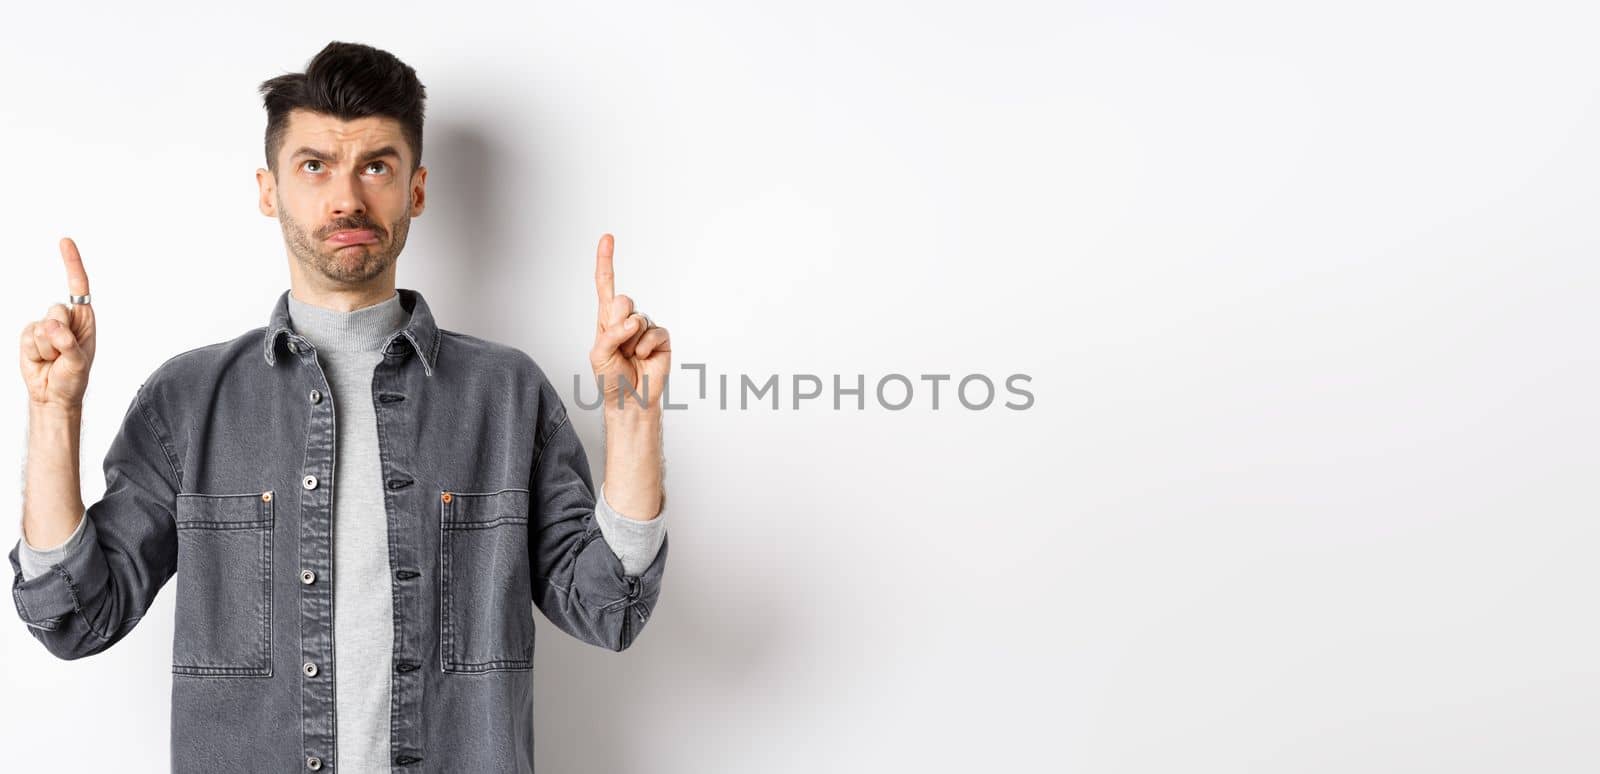 Sad frowning guy pointing and looking up, standing hesitant on white background.